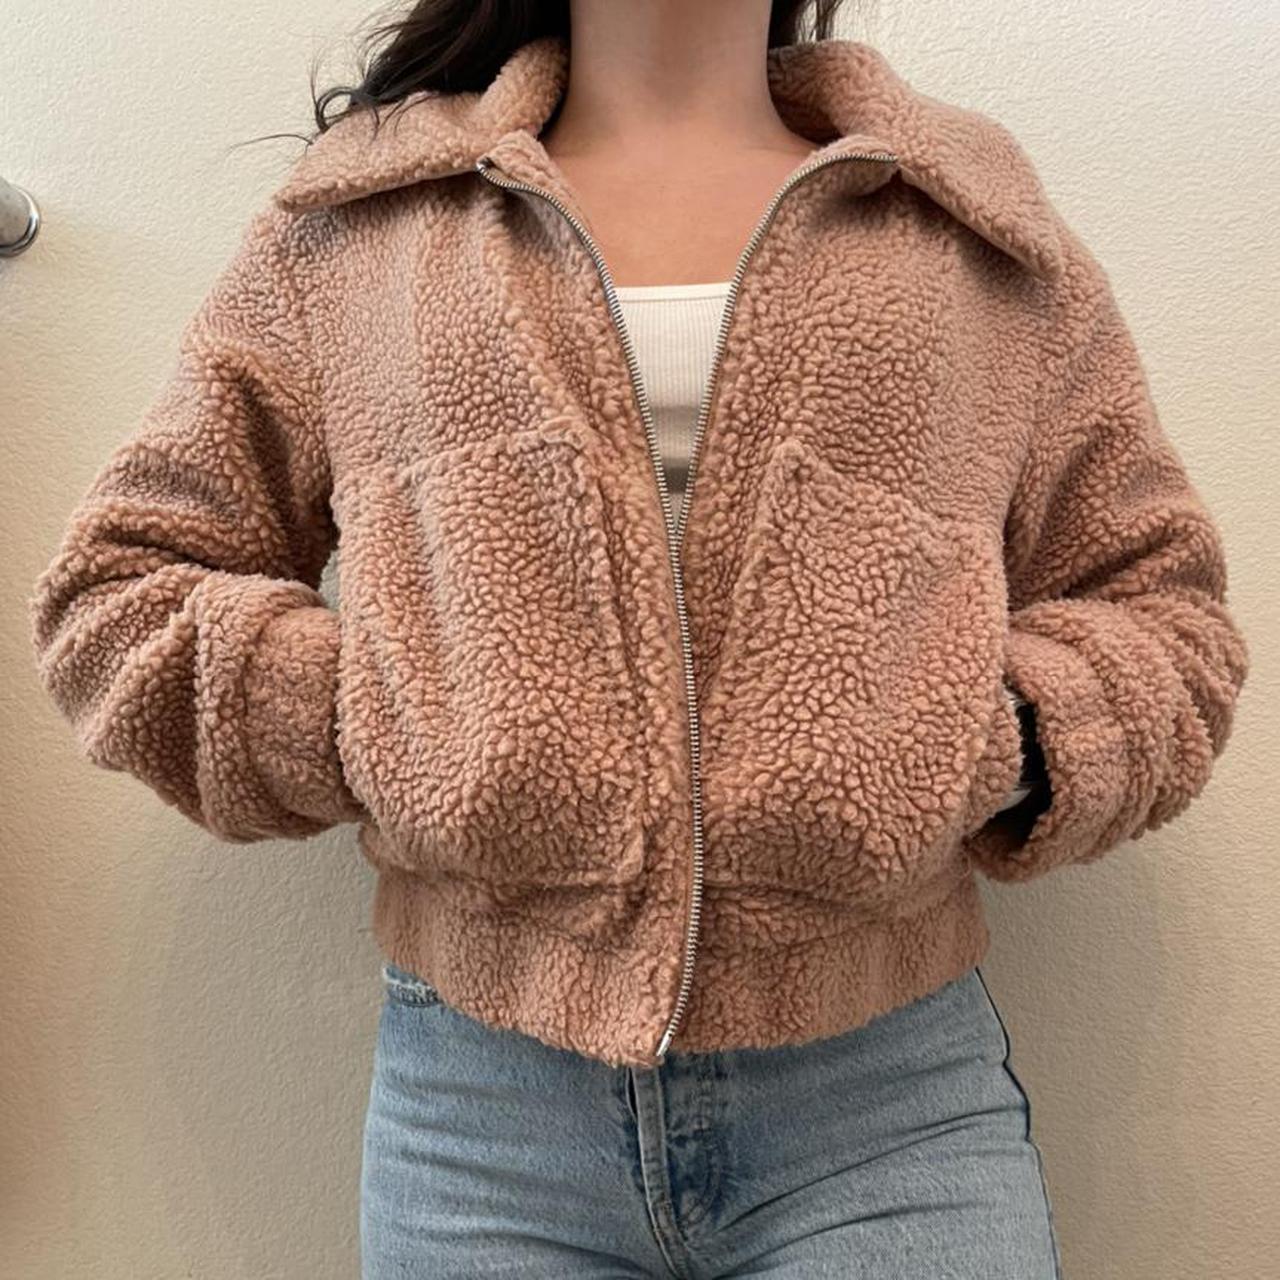 Princess Polly Doria Jacket Tan. Only worn once! $80...